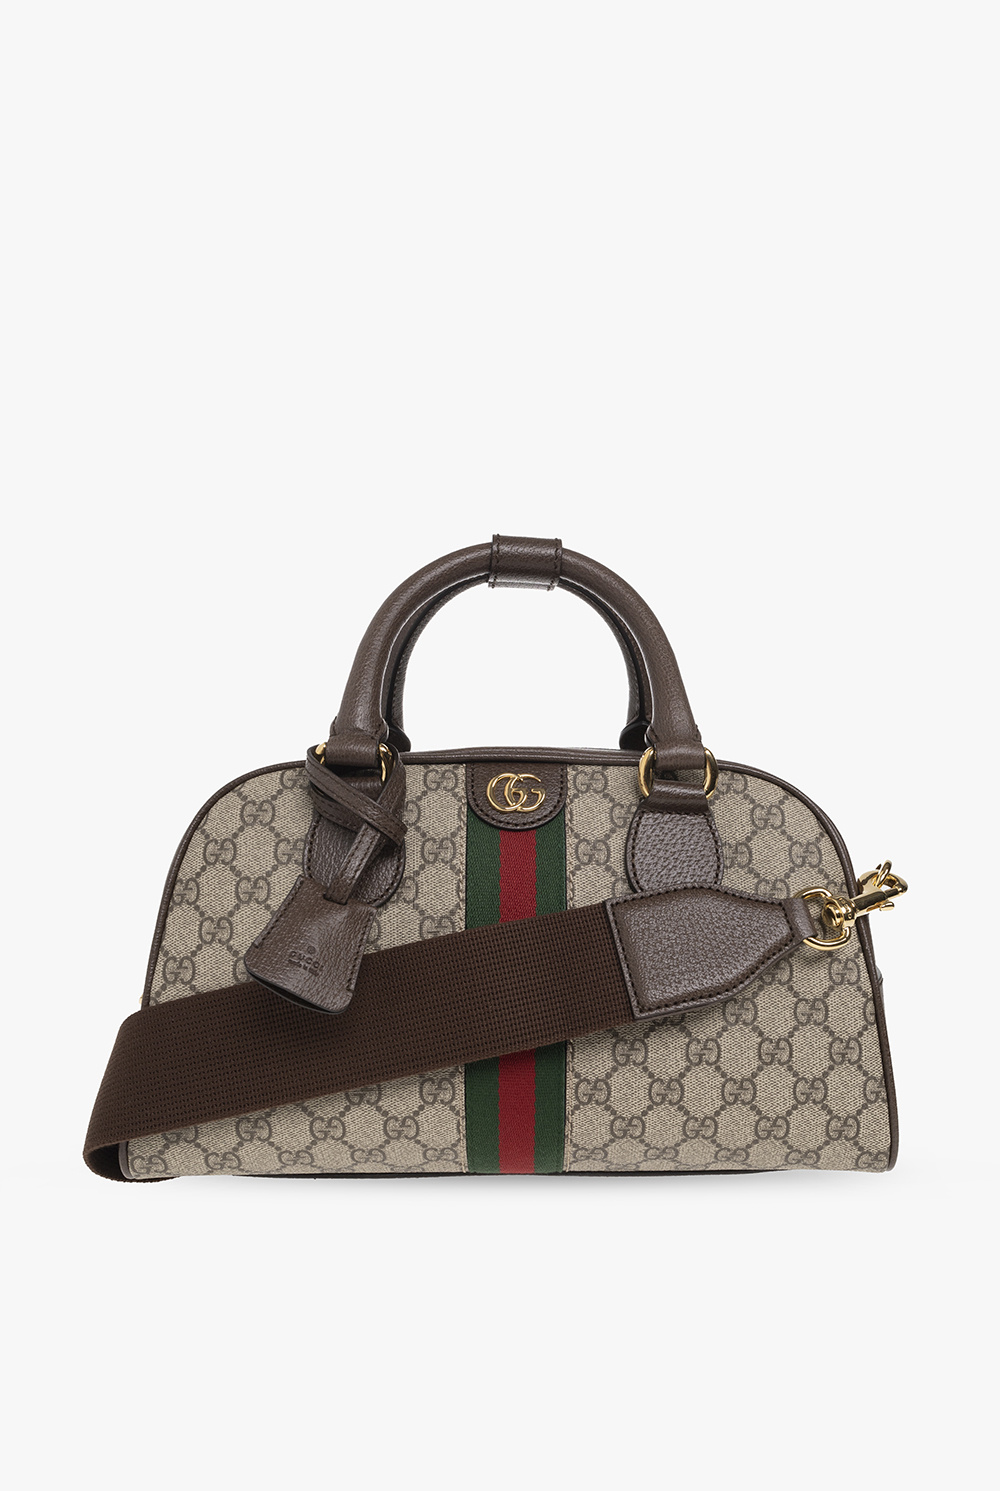 Gucci and More Brands Ask Supreme Court to Protect Workers - 米色